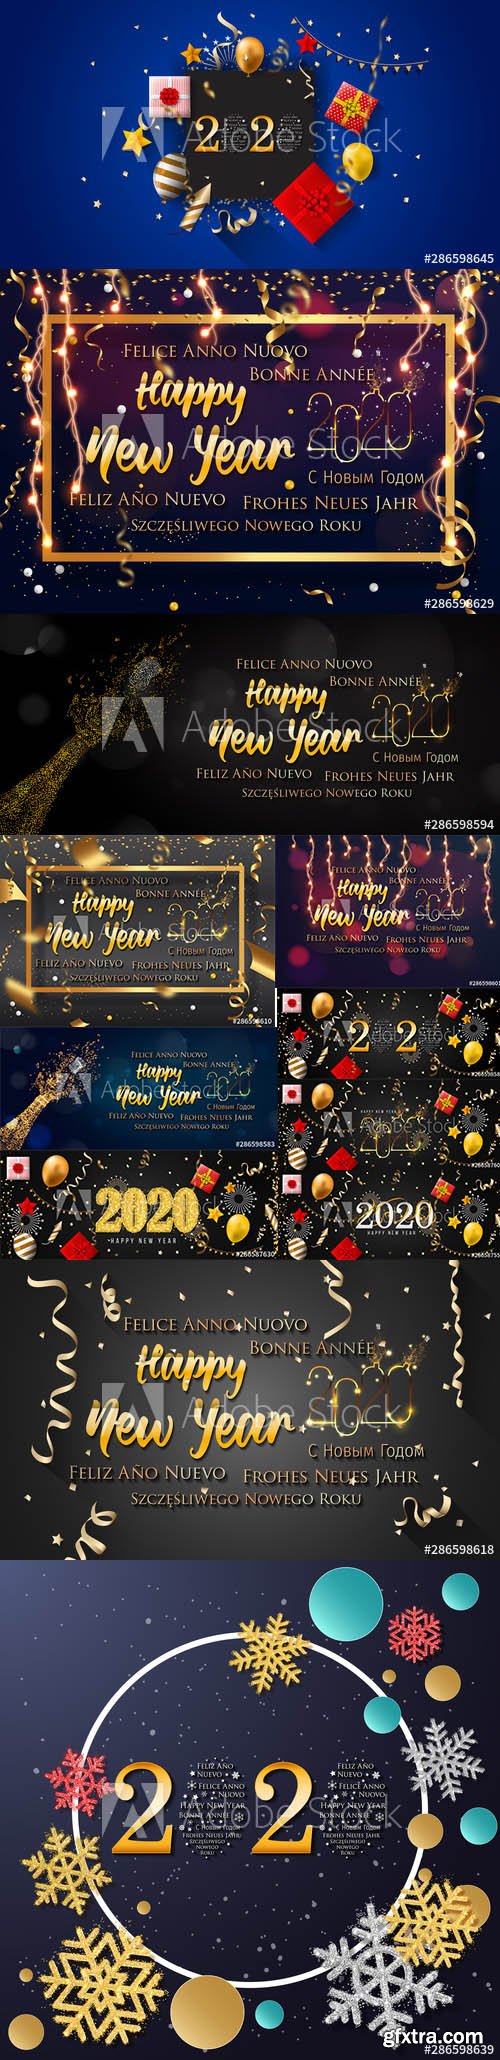 2020 Happy New Year Greeting Card and New Year Background vol.5